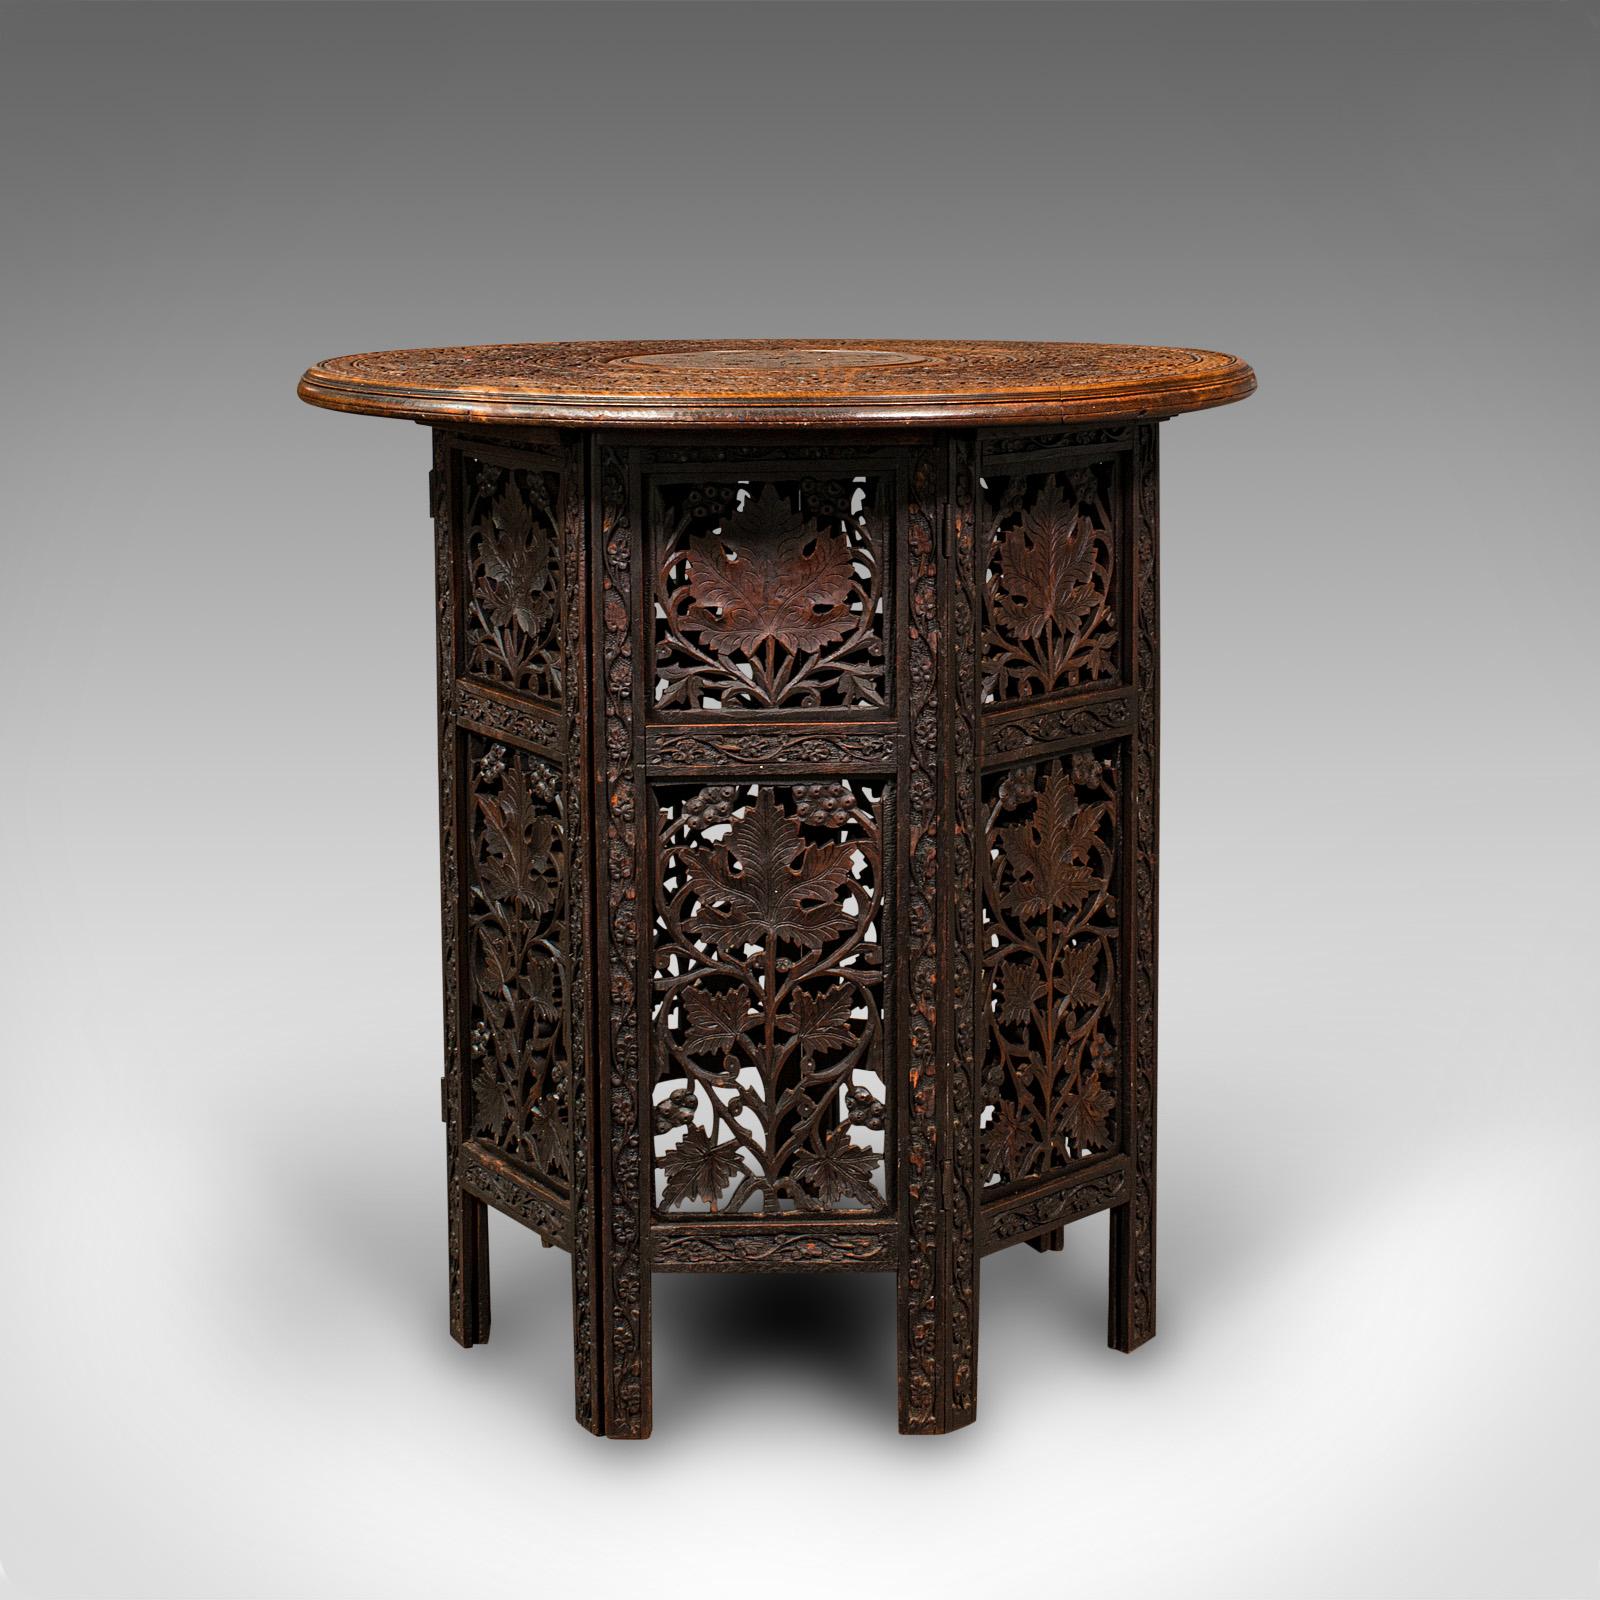 This is an antique folding Colonial table. An Anglo-Indian, teak occasional or side table, dating to the Victorian period, circa 1900.

Enthusiastically pierced fretwork upon an unusual, heptagonal folding form
Displays a desirable aged patina in